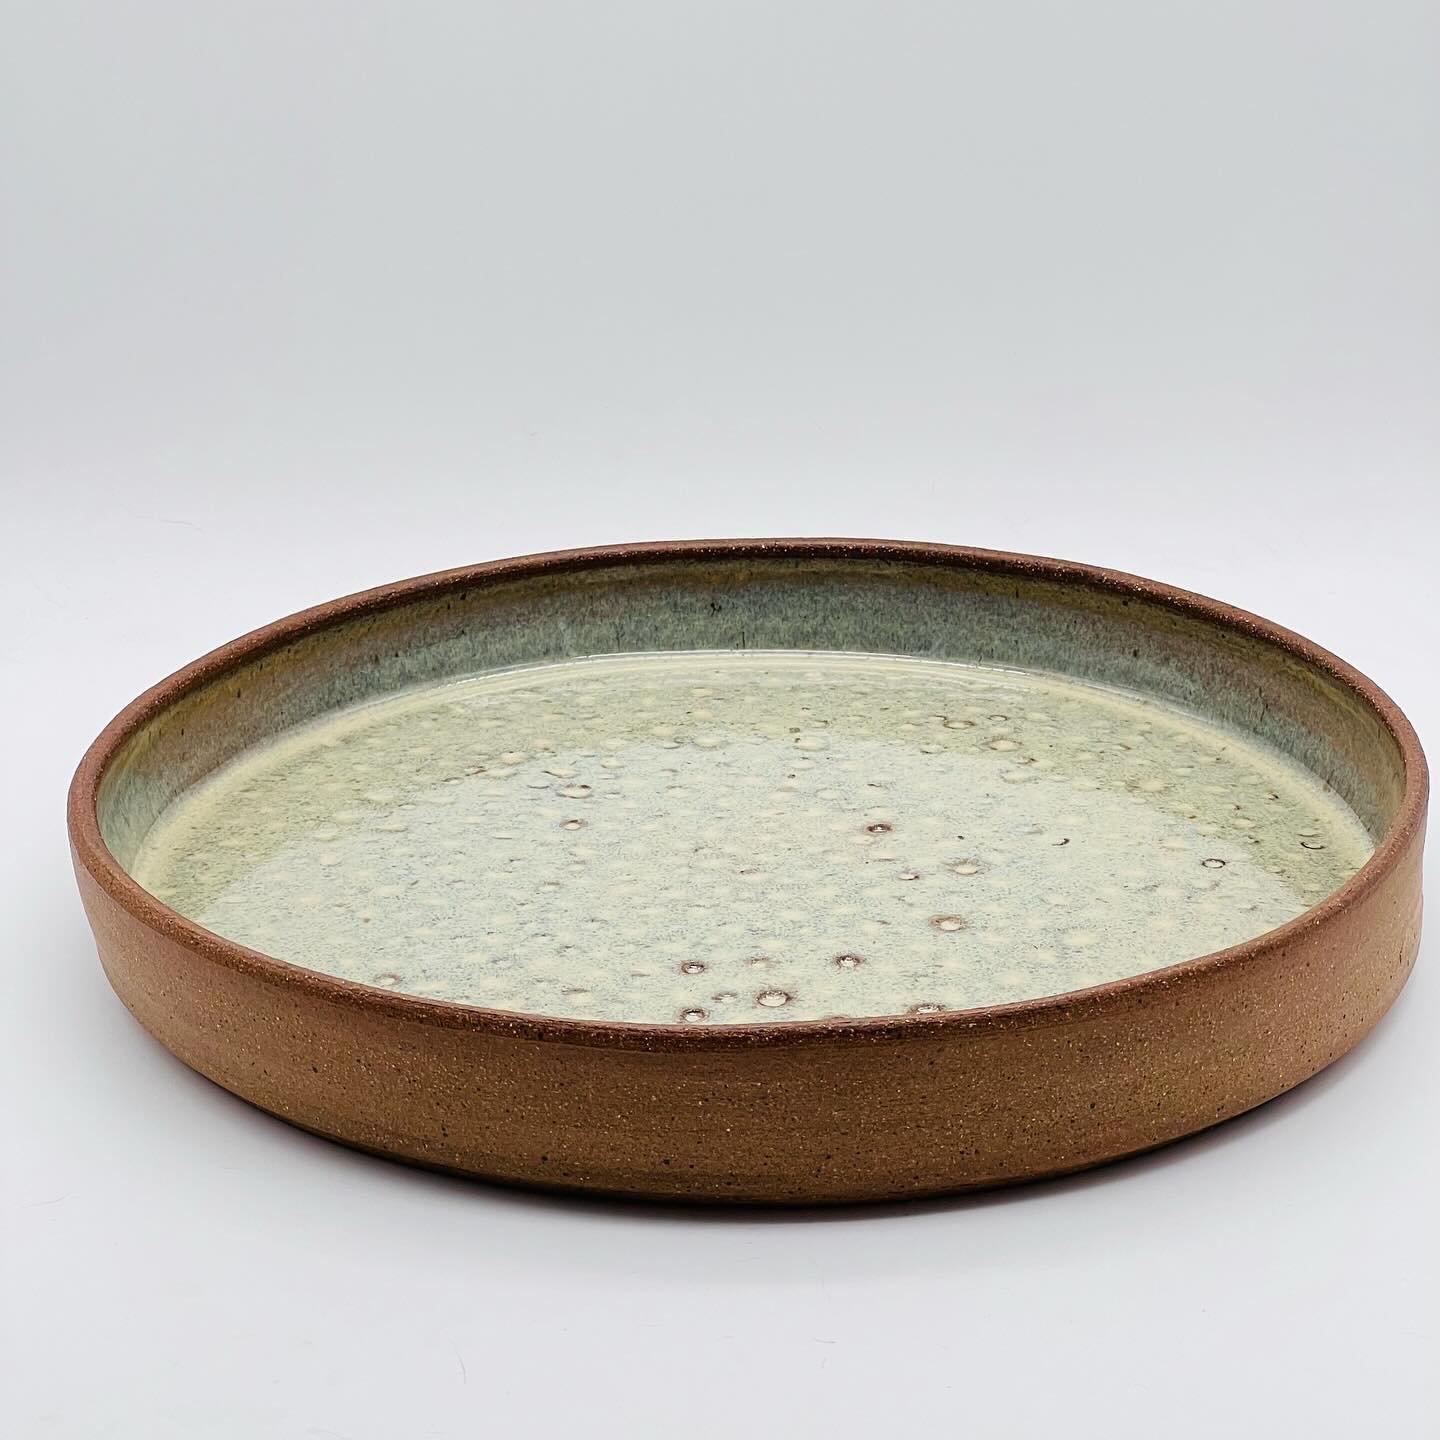 Is this a plate or a platter at 9.5&rdquo;d? However it will be used, it&rsquo;ll be great! The toasty exposed clay on the outside is a great contrast to the lichen-like glaze inside. 
.
.
.
#plate #platter #plattergoals #ceramicplatter #ceramicplate